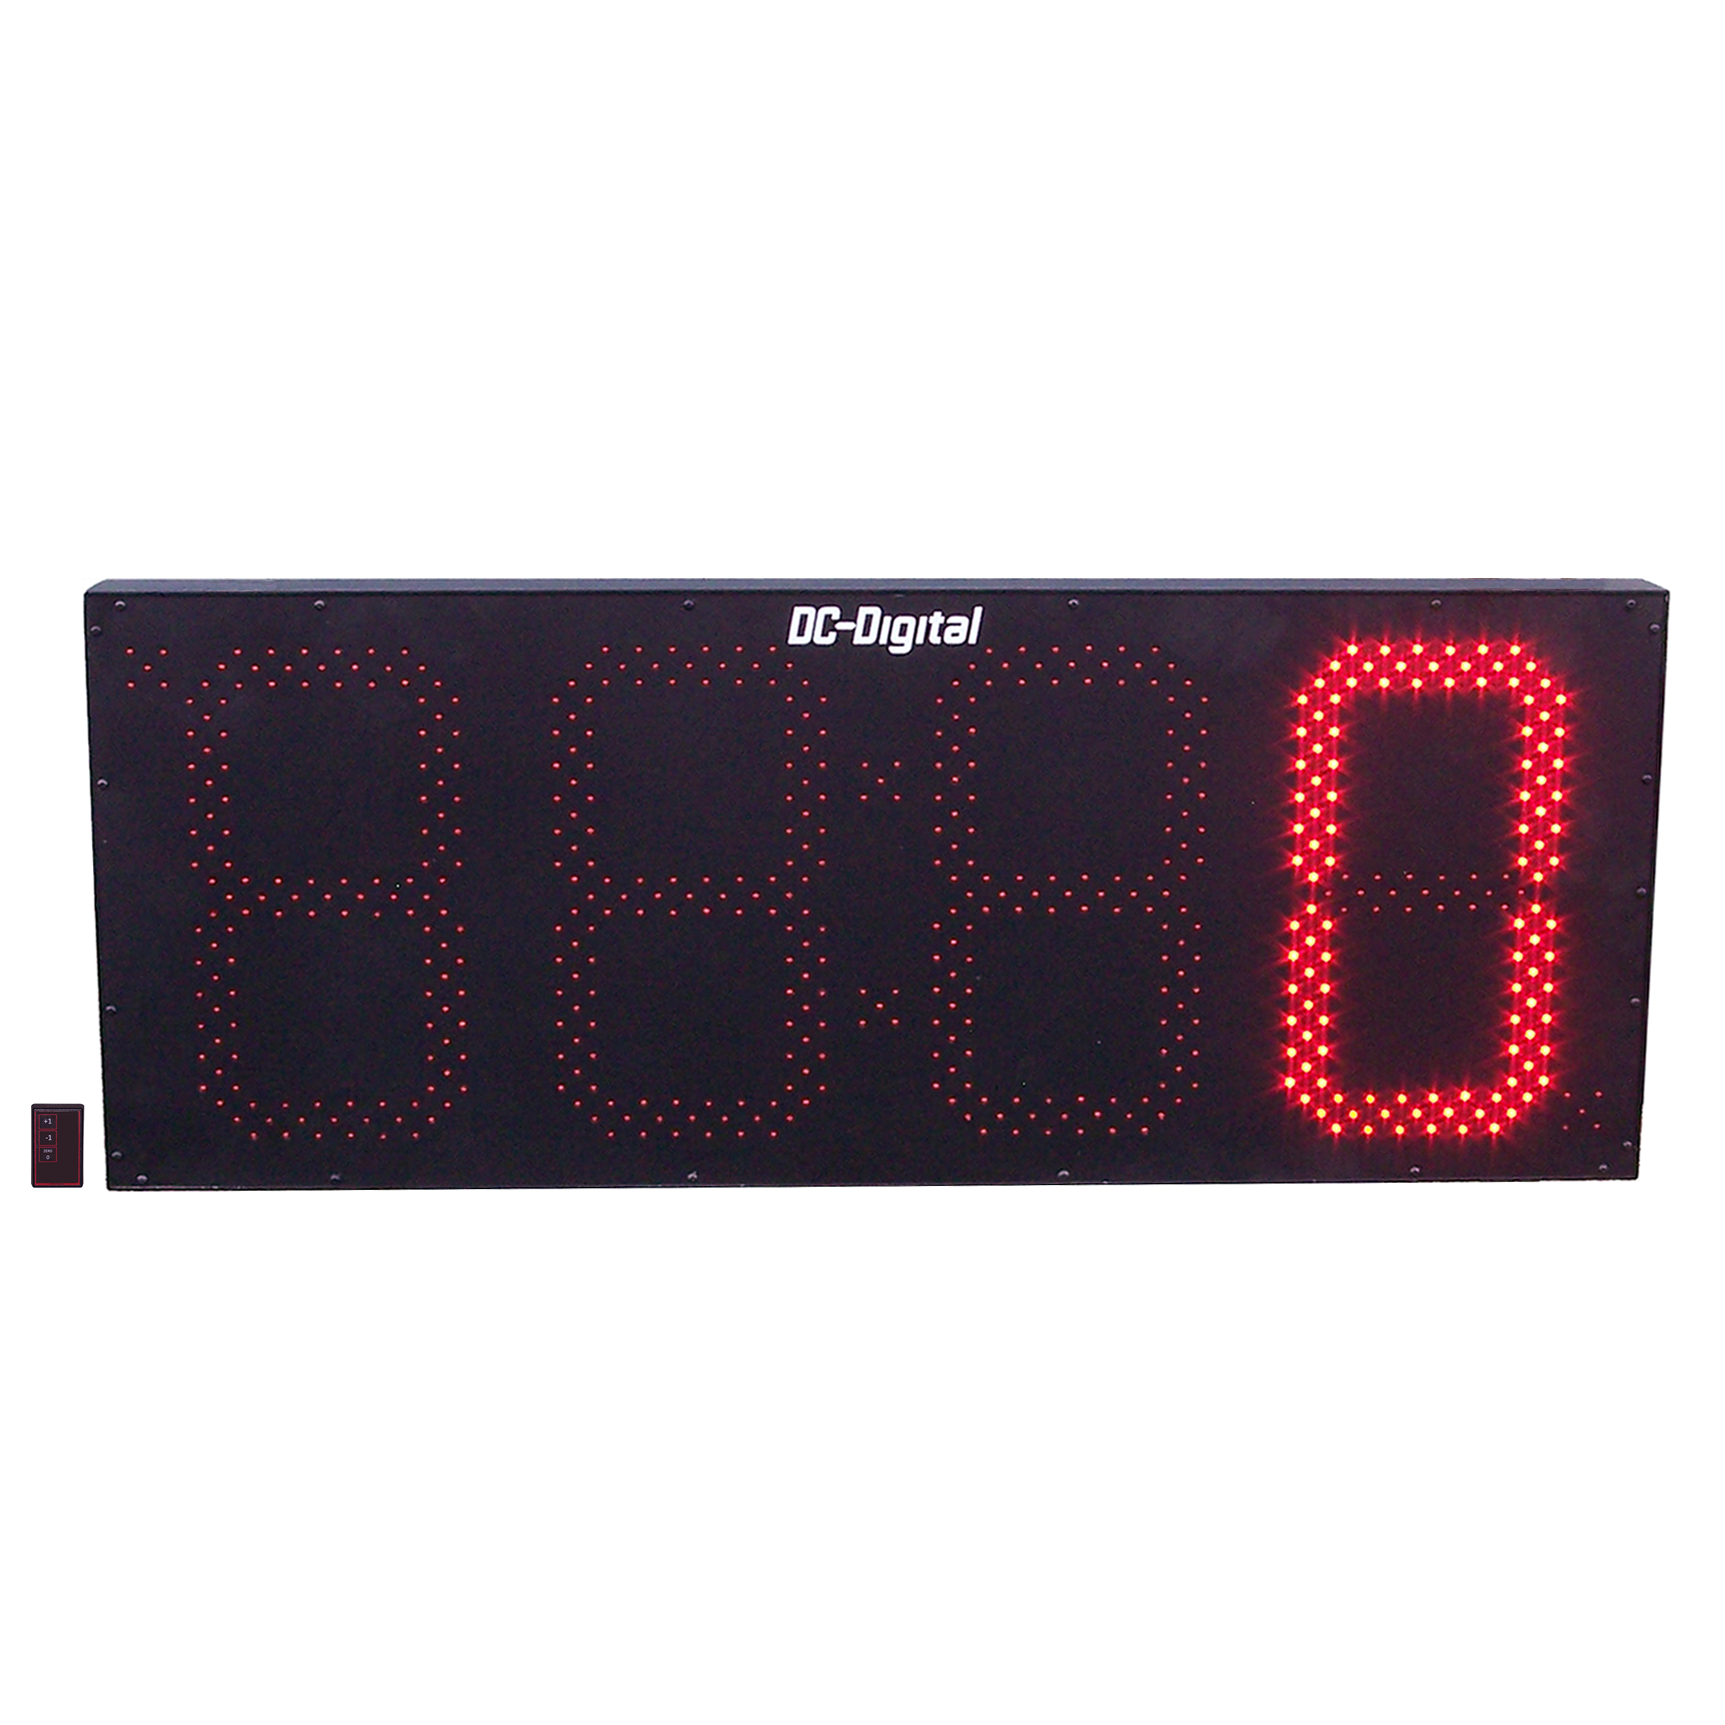 (DC-150T-UP-DAYS-W) 15.0 Inch LED Digit, RF-Wireless Remote Handheld Controlled, Count Up by Days Timer (OUTDOOR)